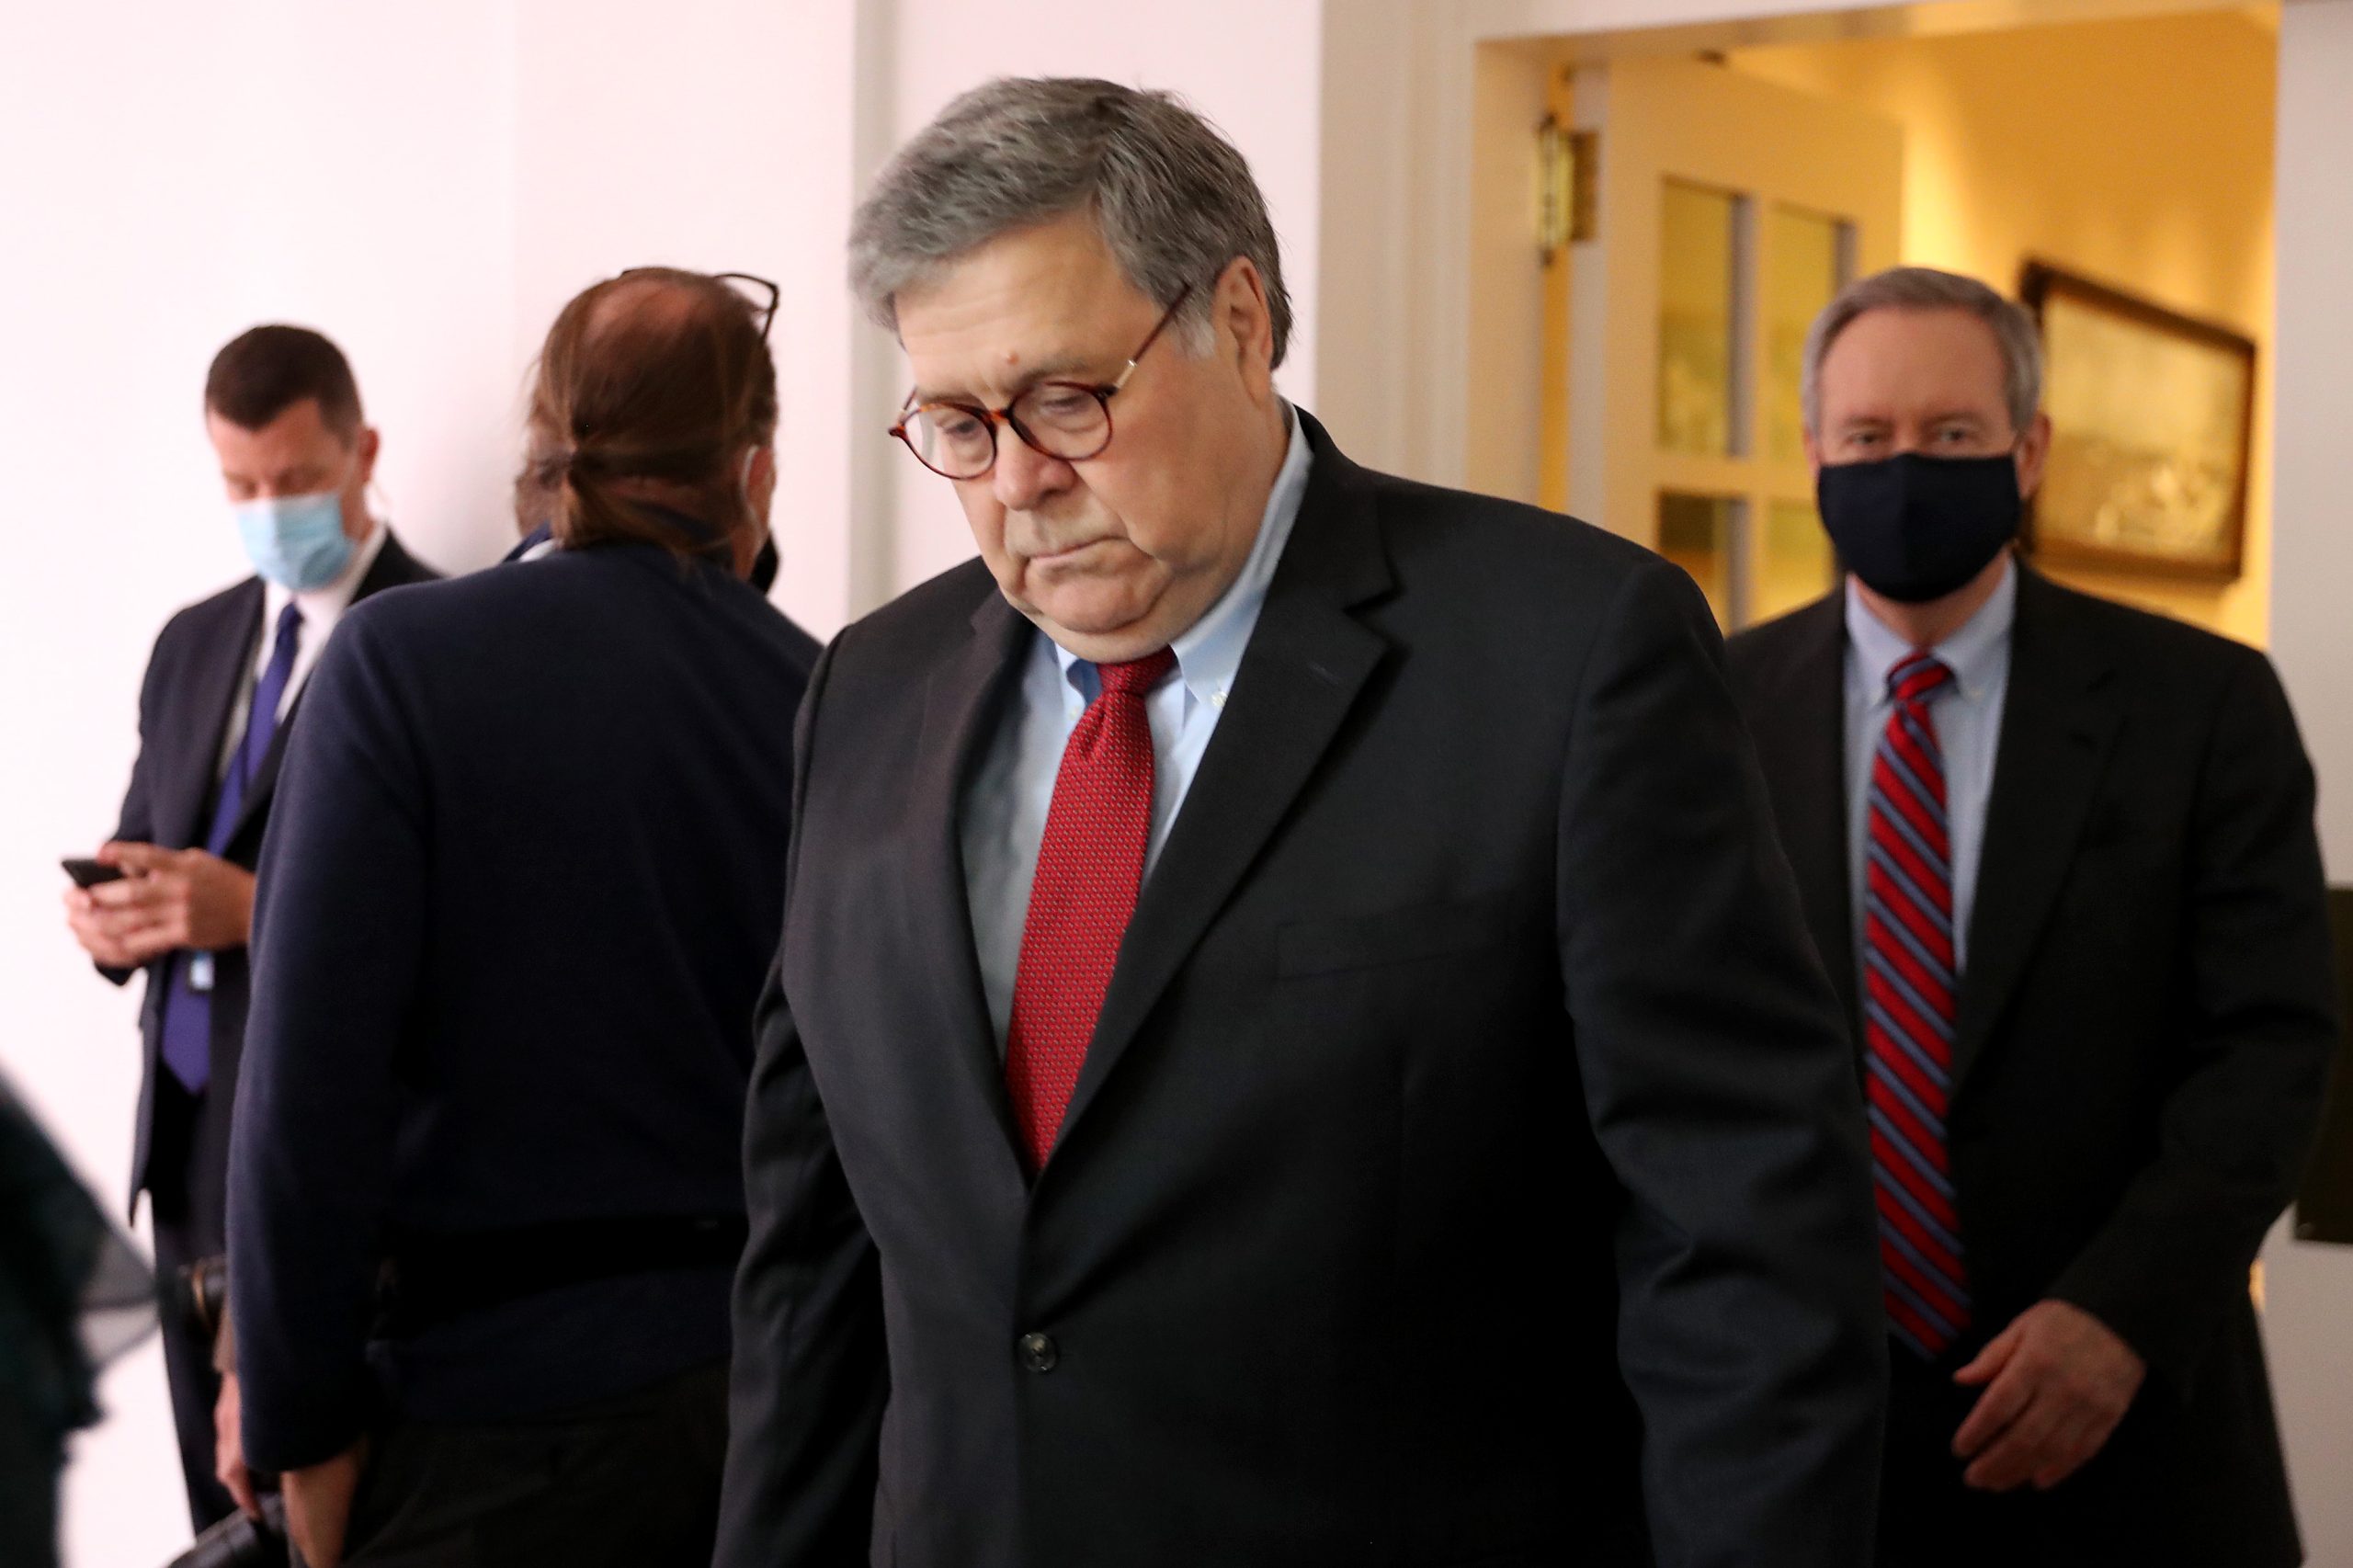 Trump Saves Most Merciless Humiliation For Bill Barr